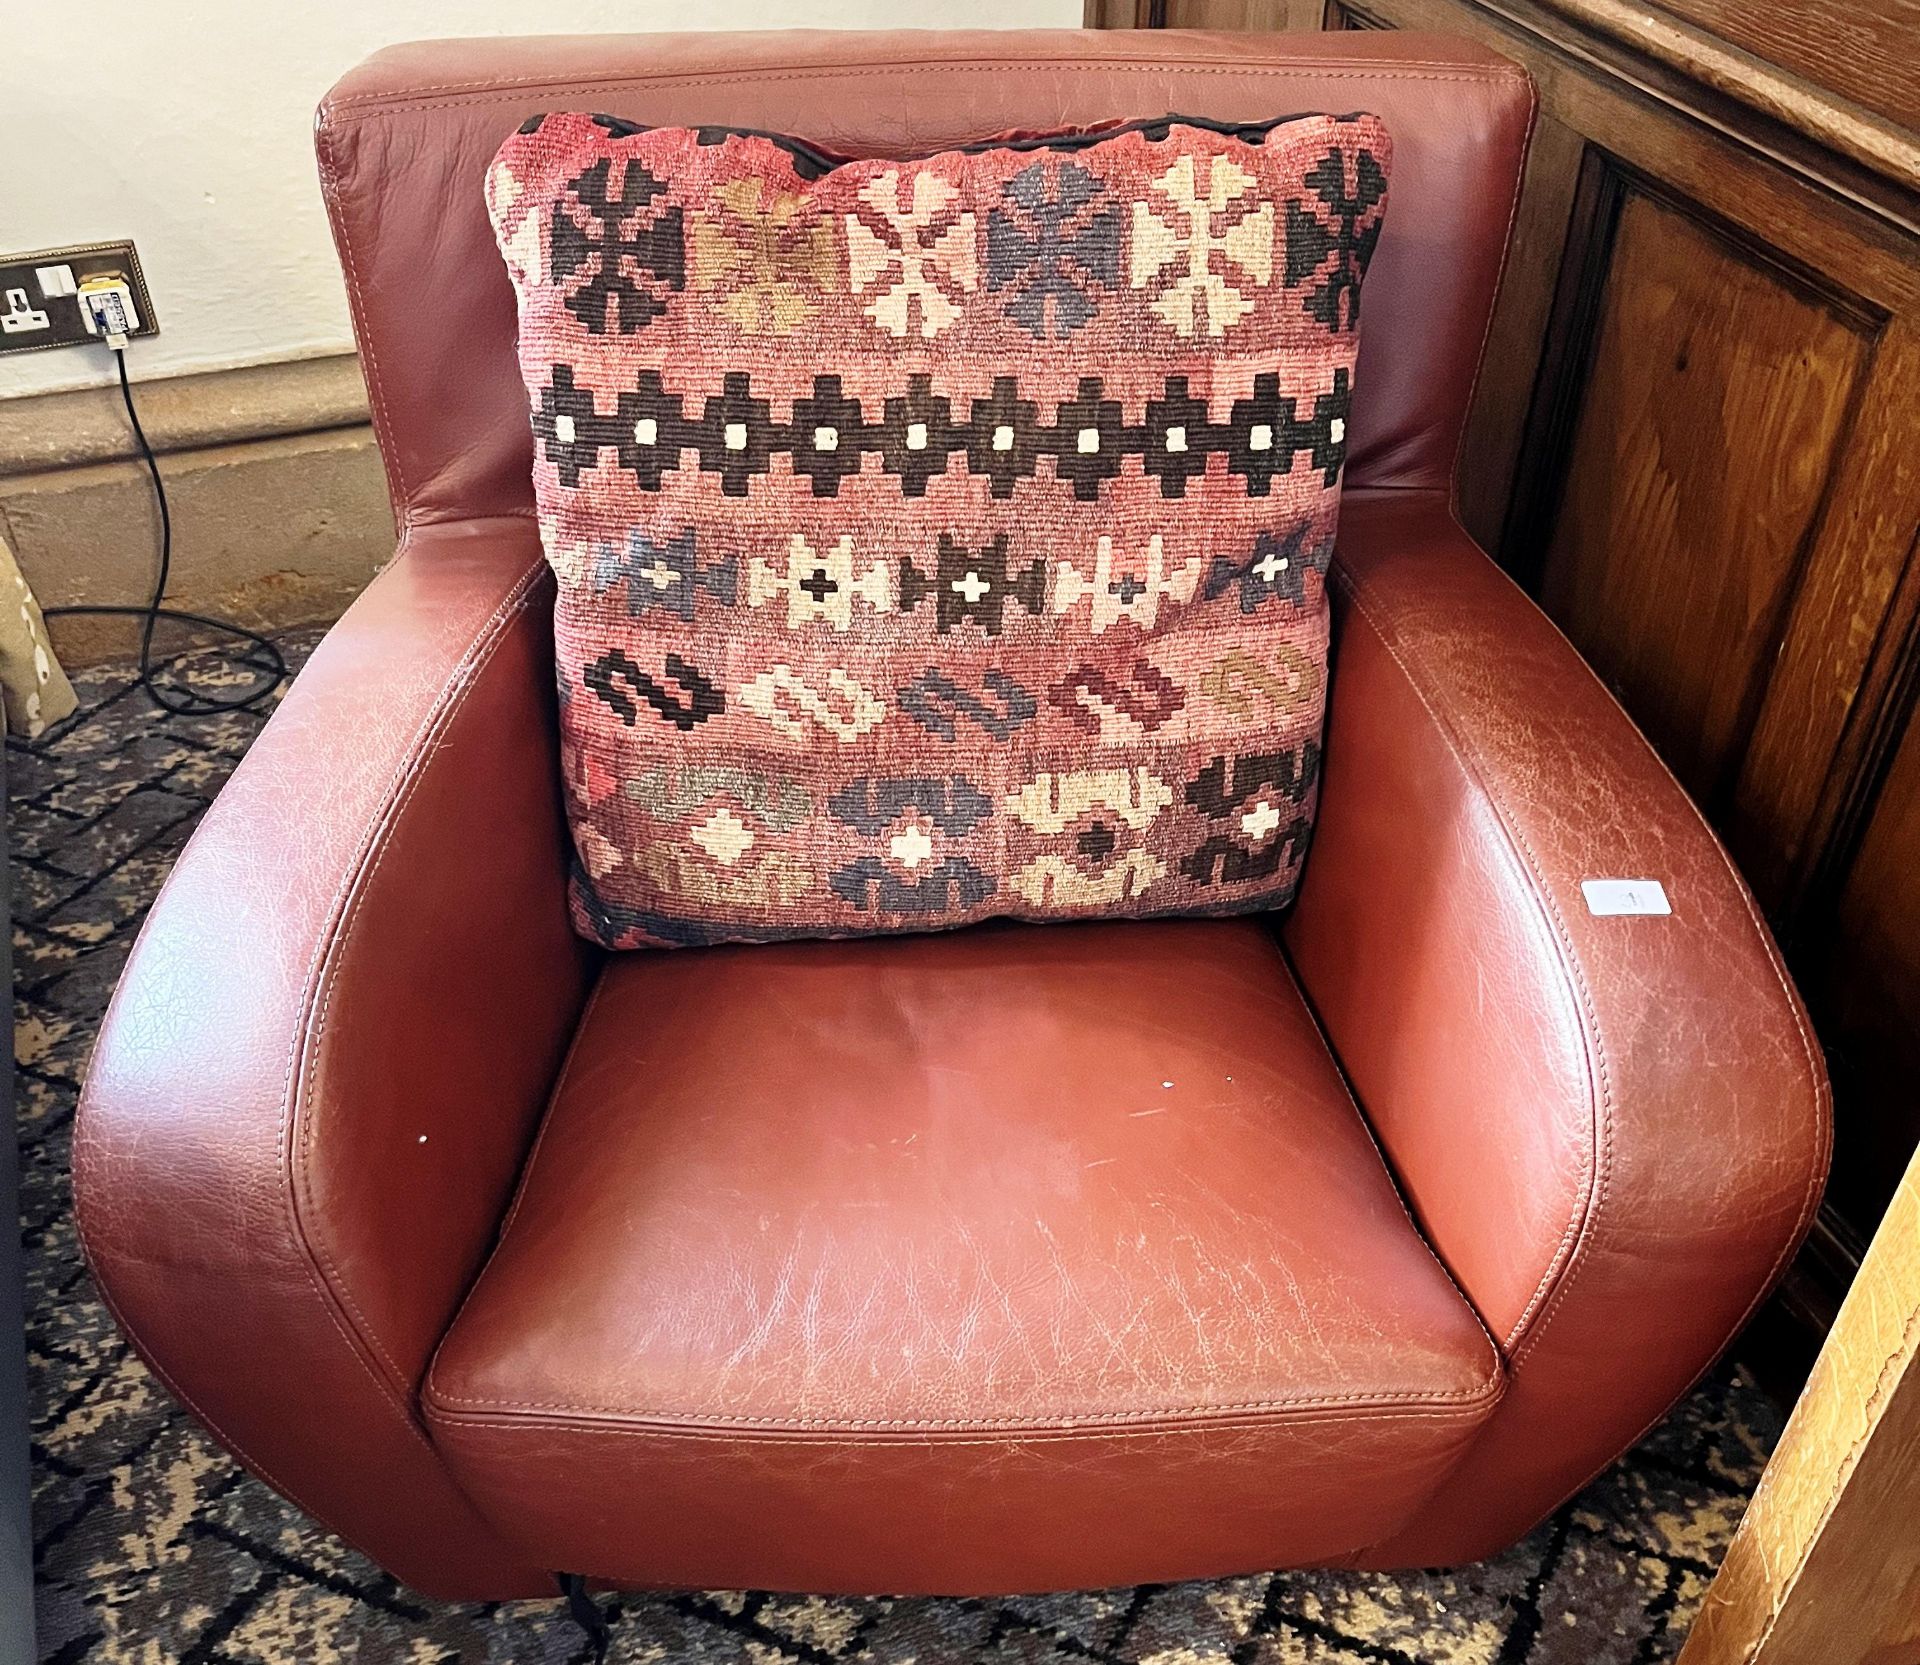 BROWN LEATHER ARMCHAIR AND CUSHION